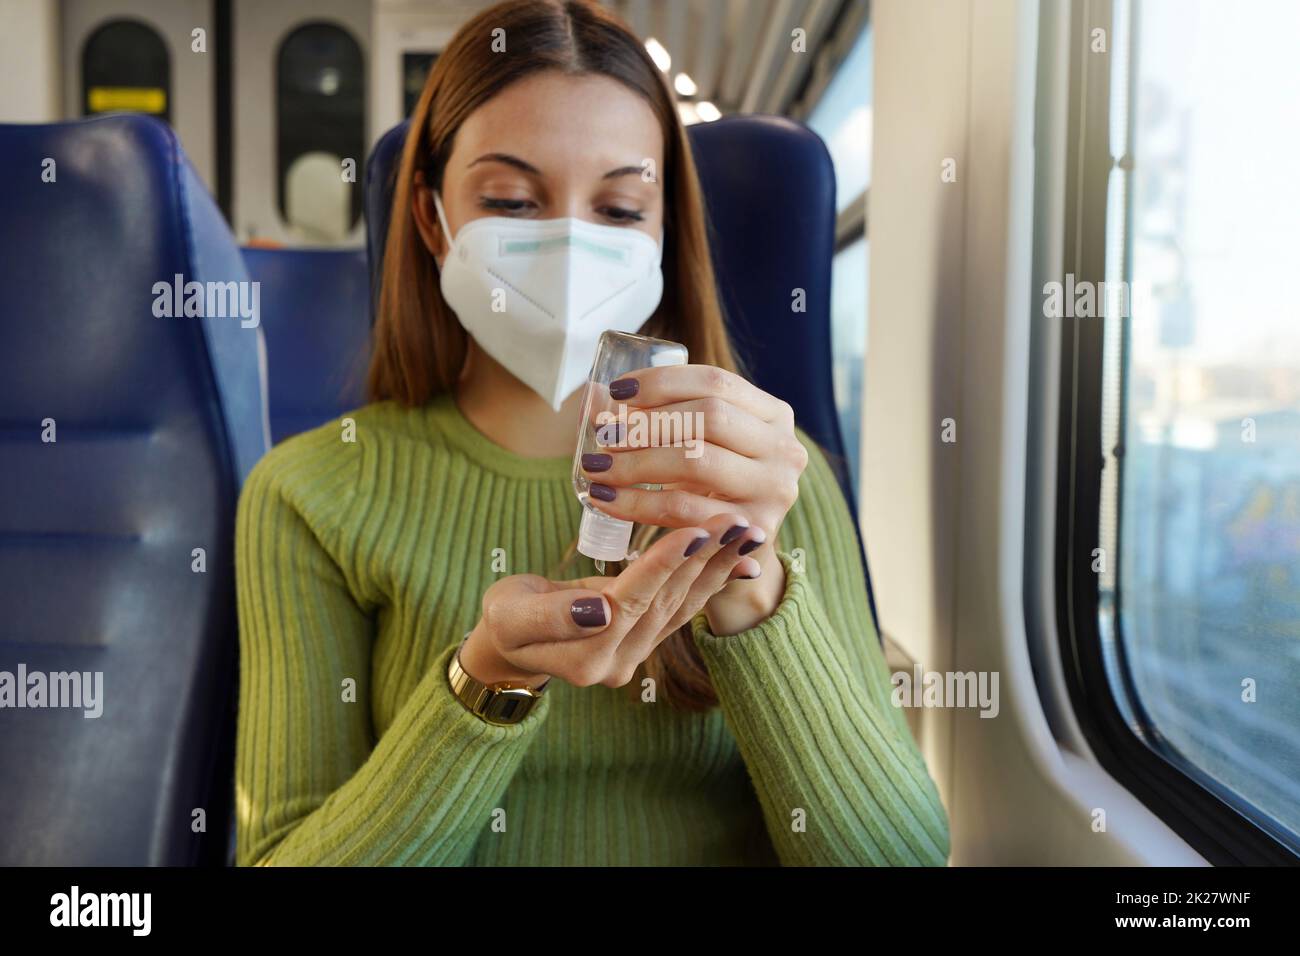 Business woman with medical face mask using alcohol gel sanitizing hands on public transport. Antiseptic, hygiene and health care concept. Focus on hand. Stock Photo